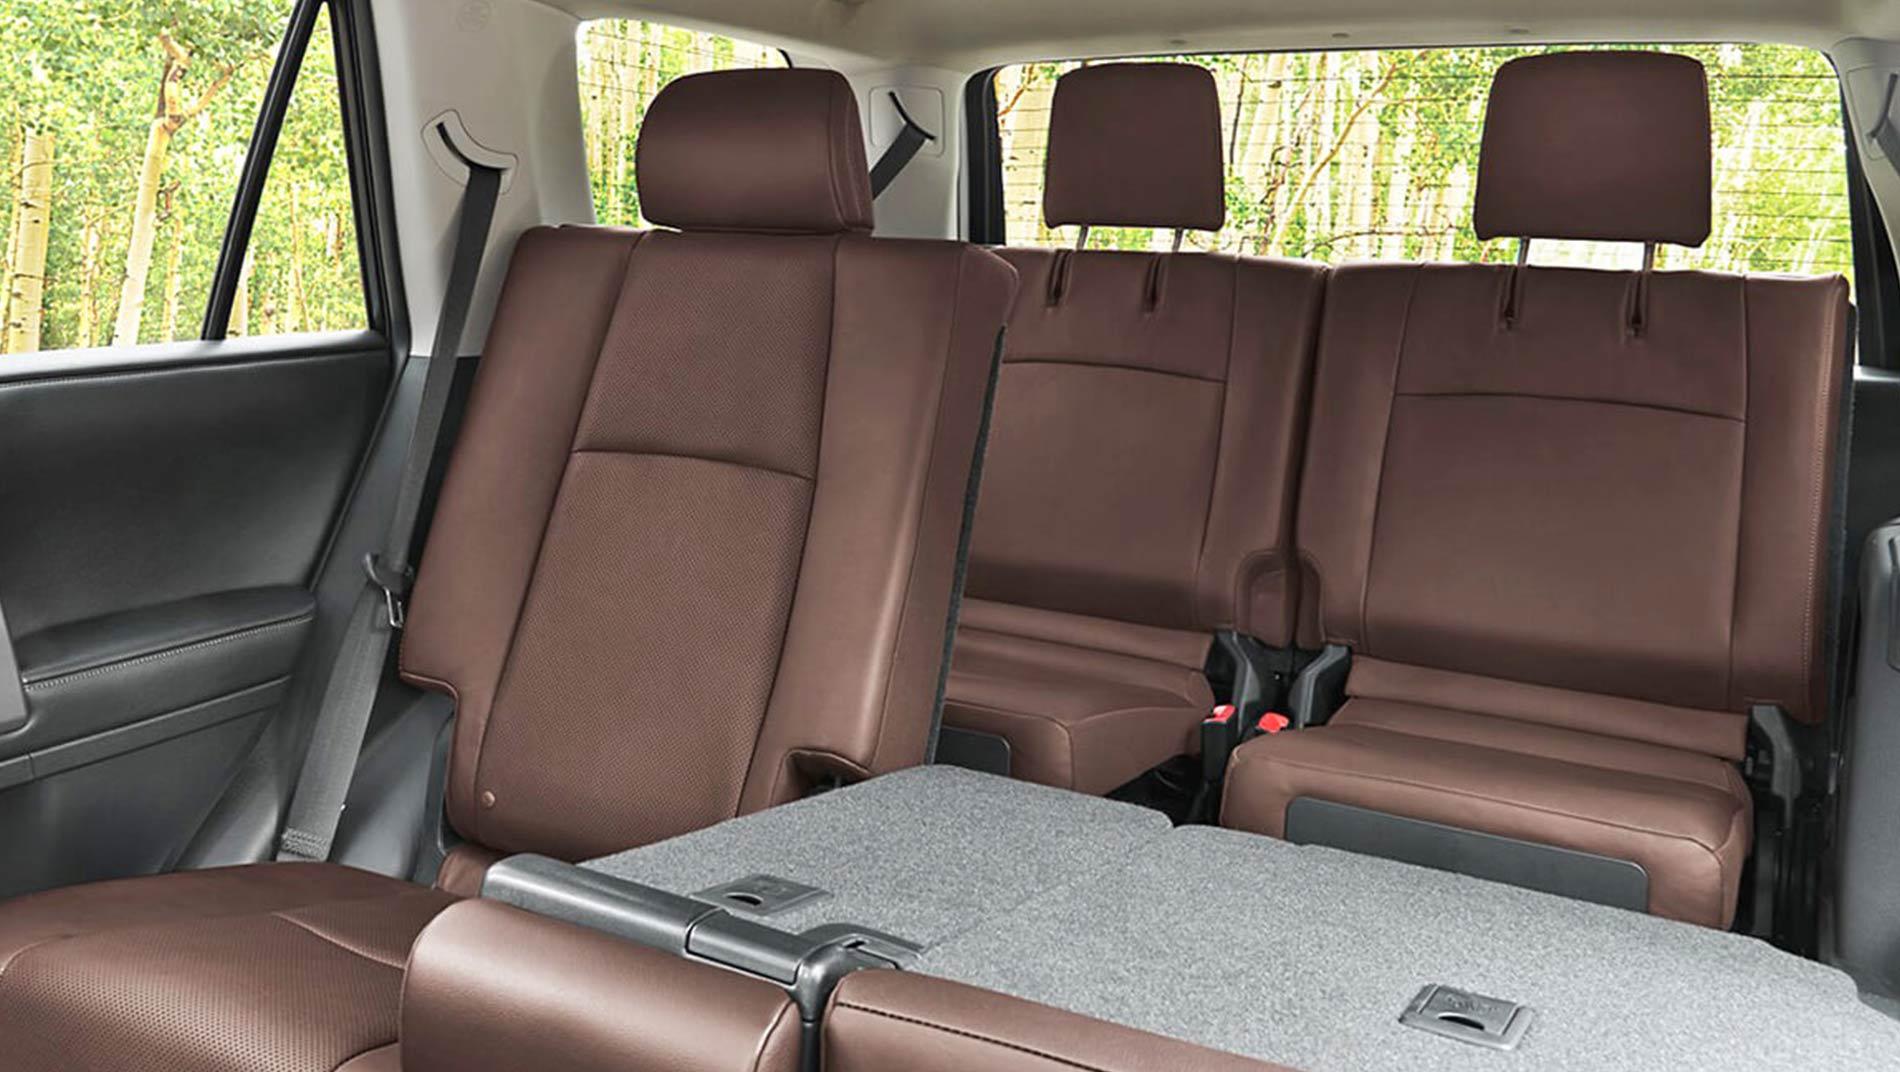 Interior back seating of a Toyota 4Runner with leather easy fold seats